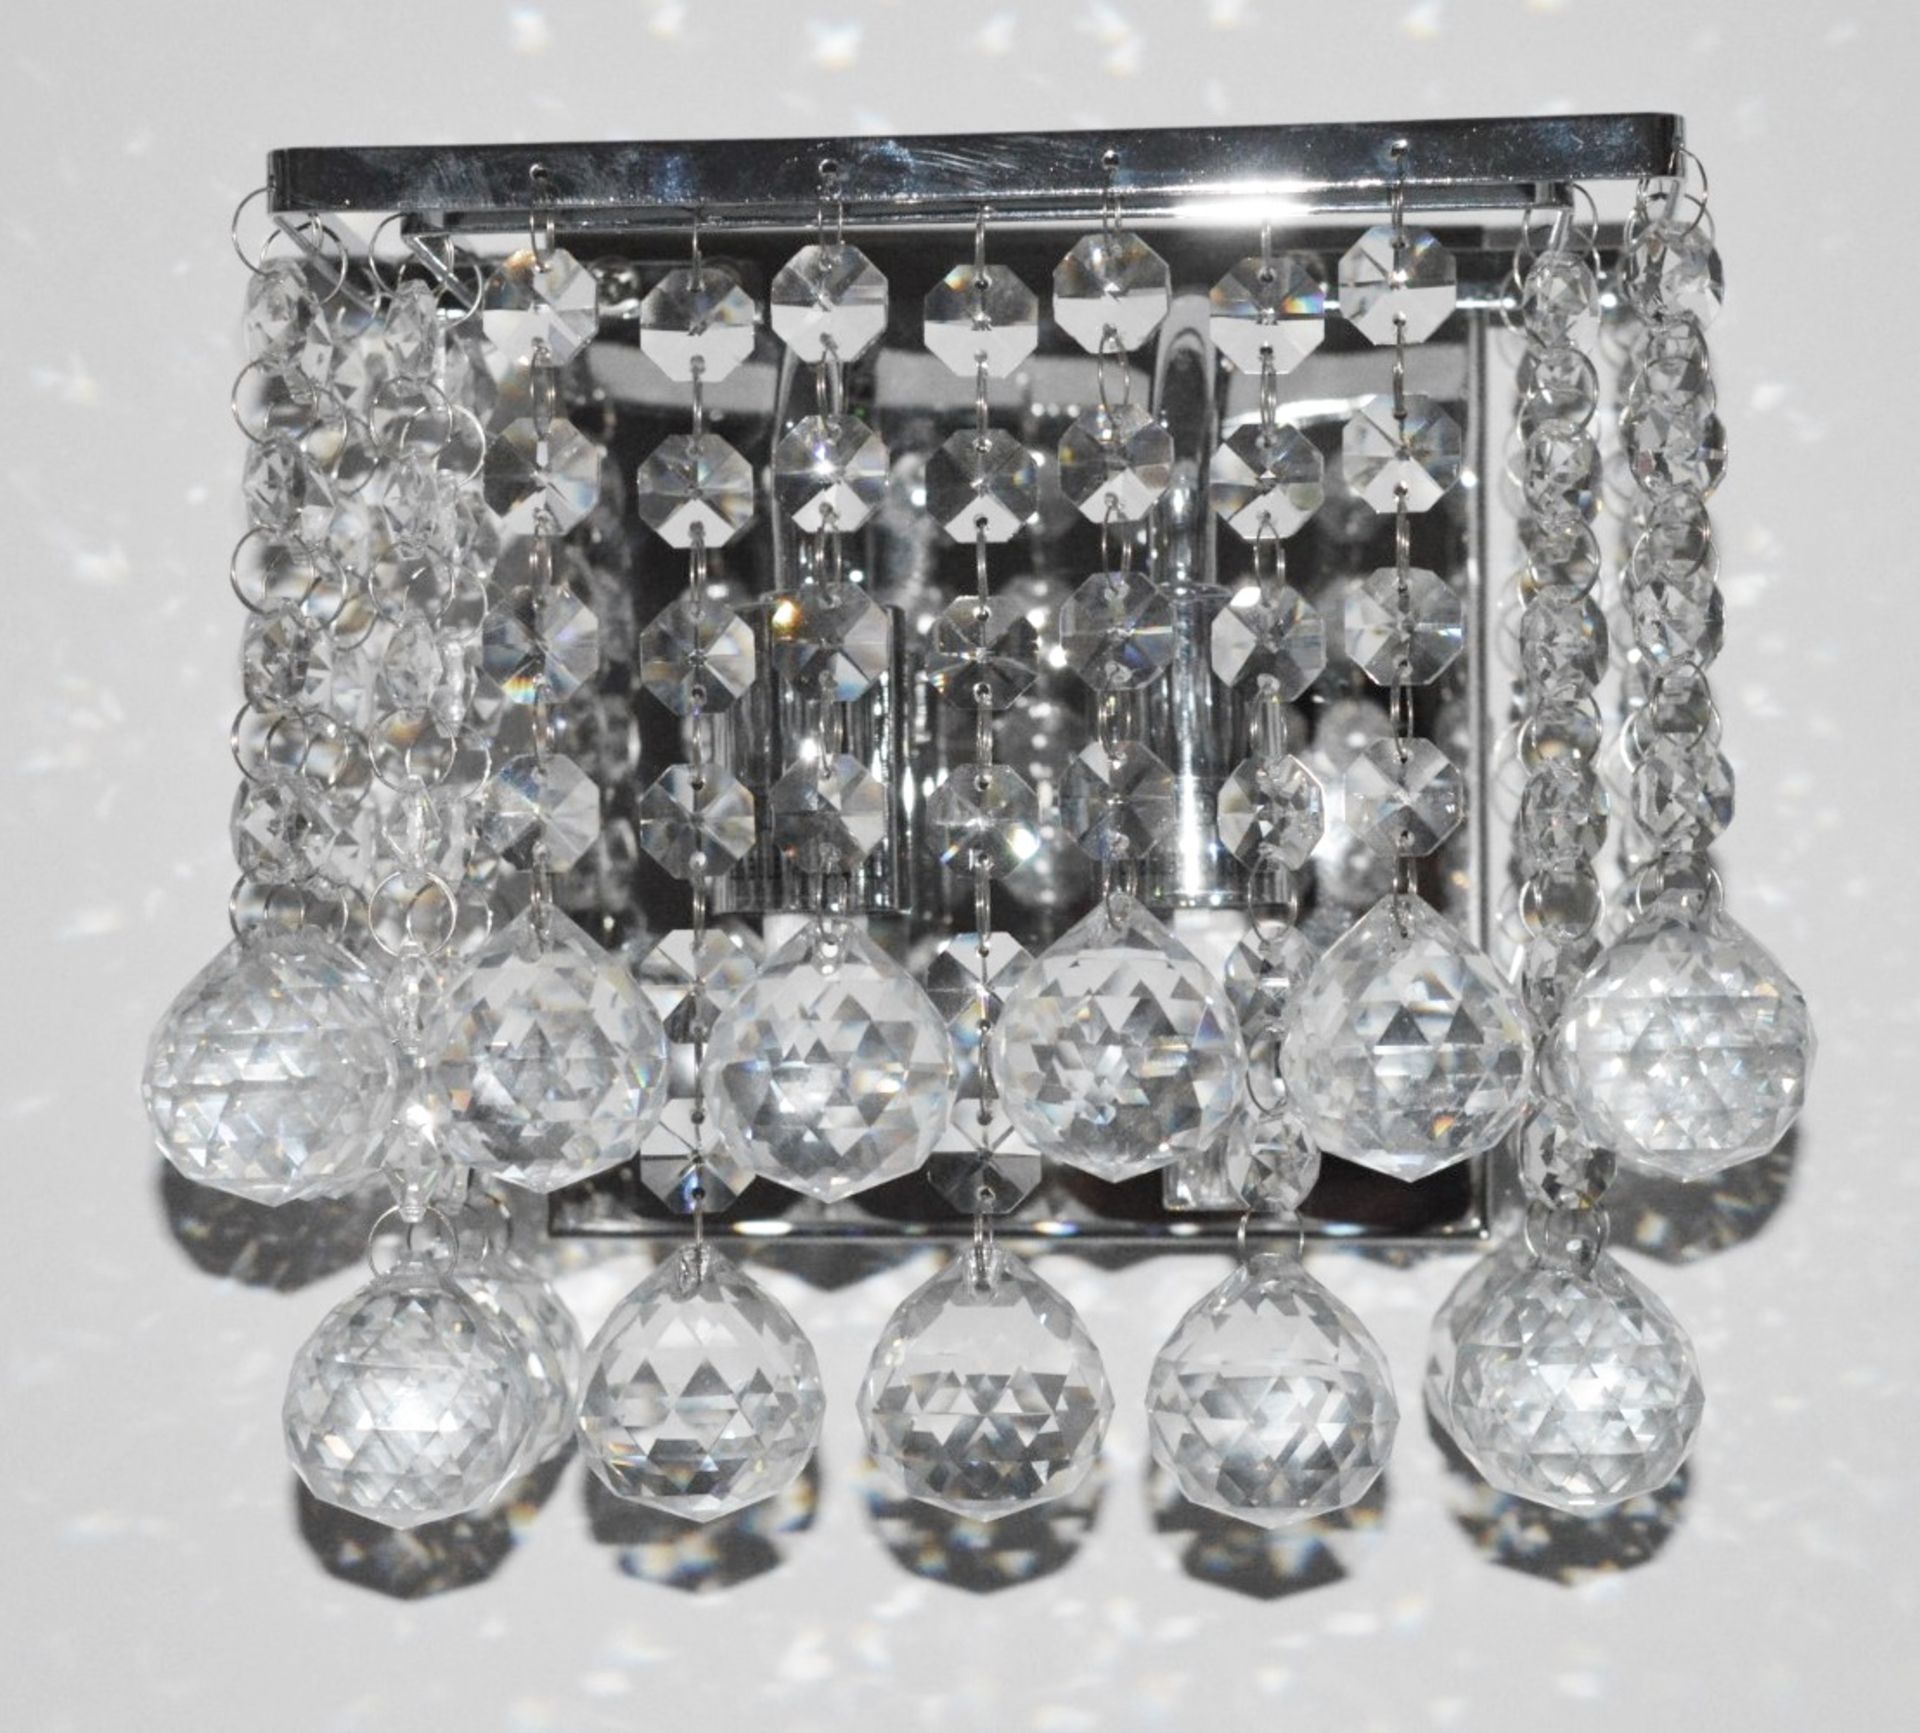 1 x Hanna Chrome 2 Light Square Wall Bracket With Clear Crystal Balls - Ex Display - RRP £67.20 - Image 2 of 3